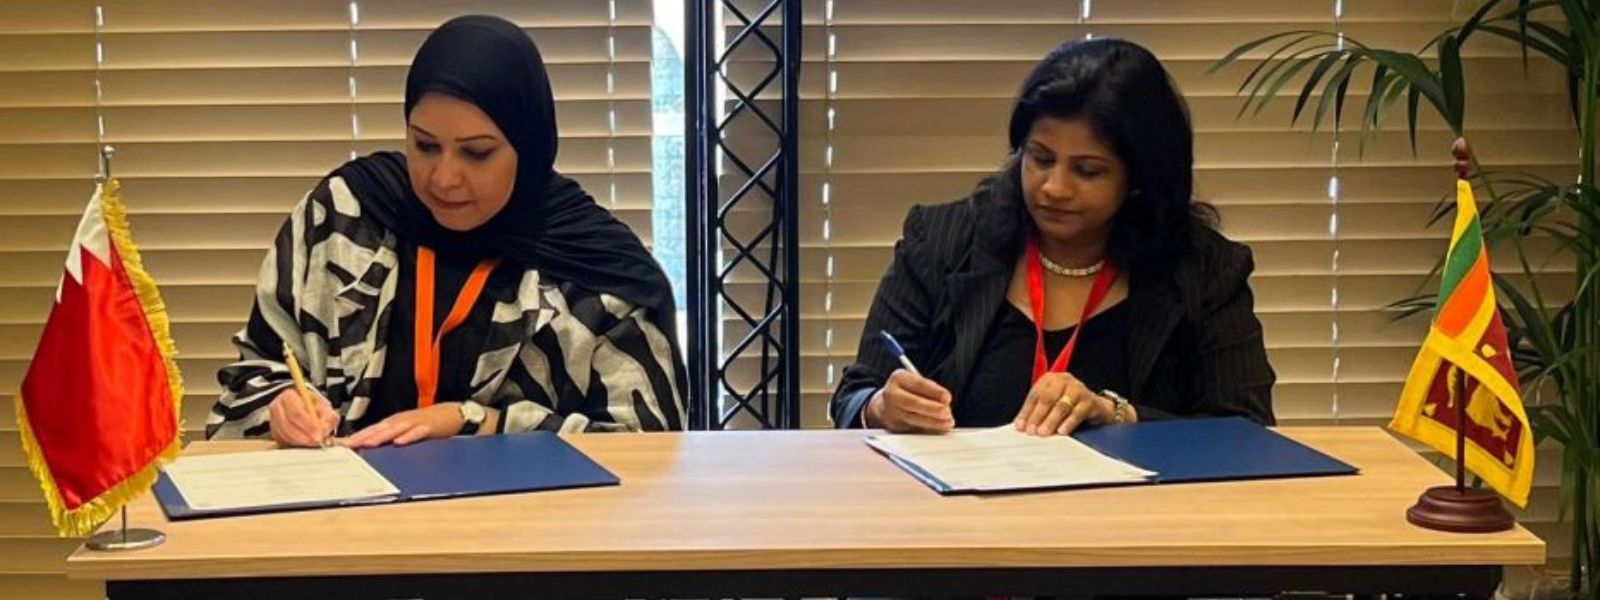 FIU signs MoU with Bahrain